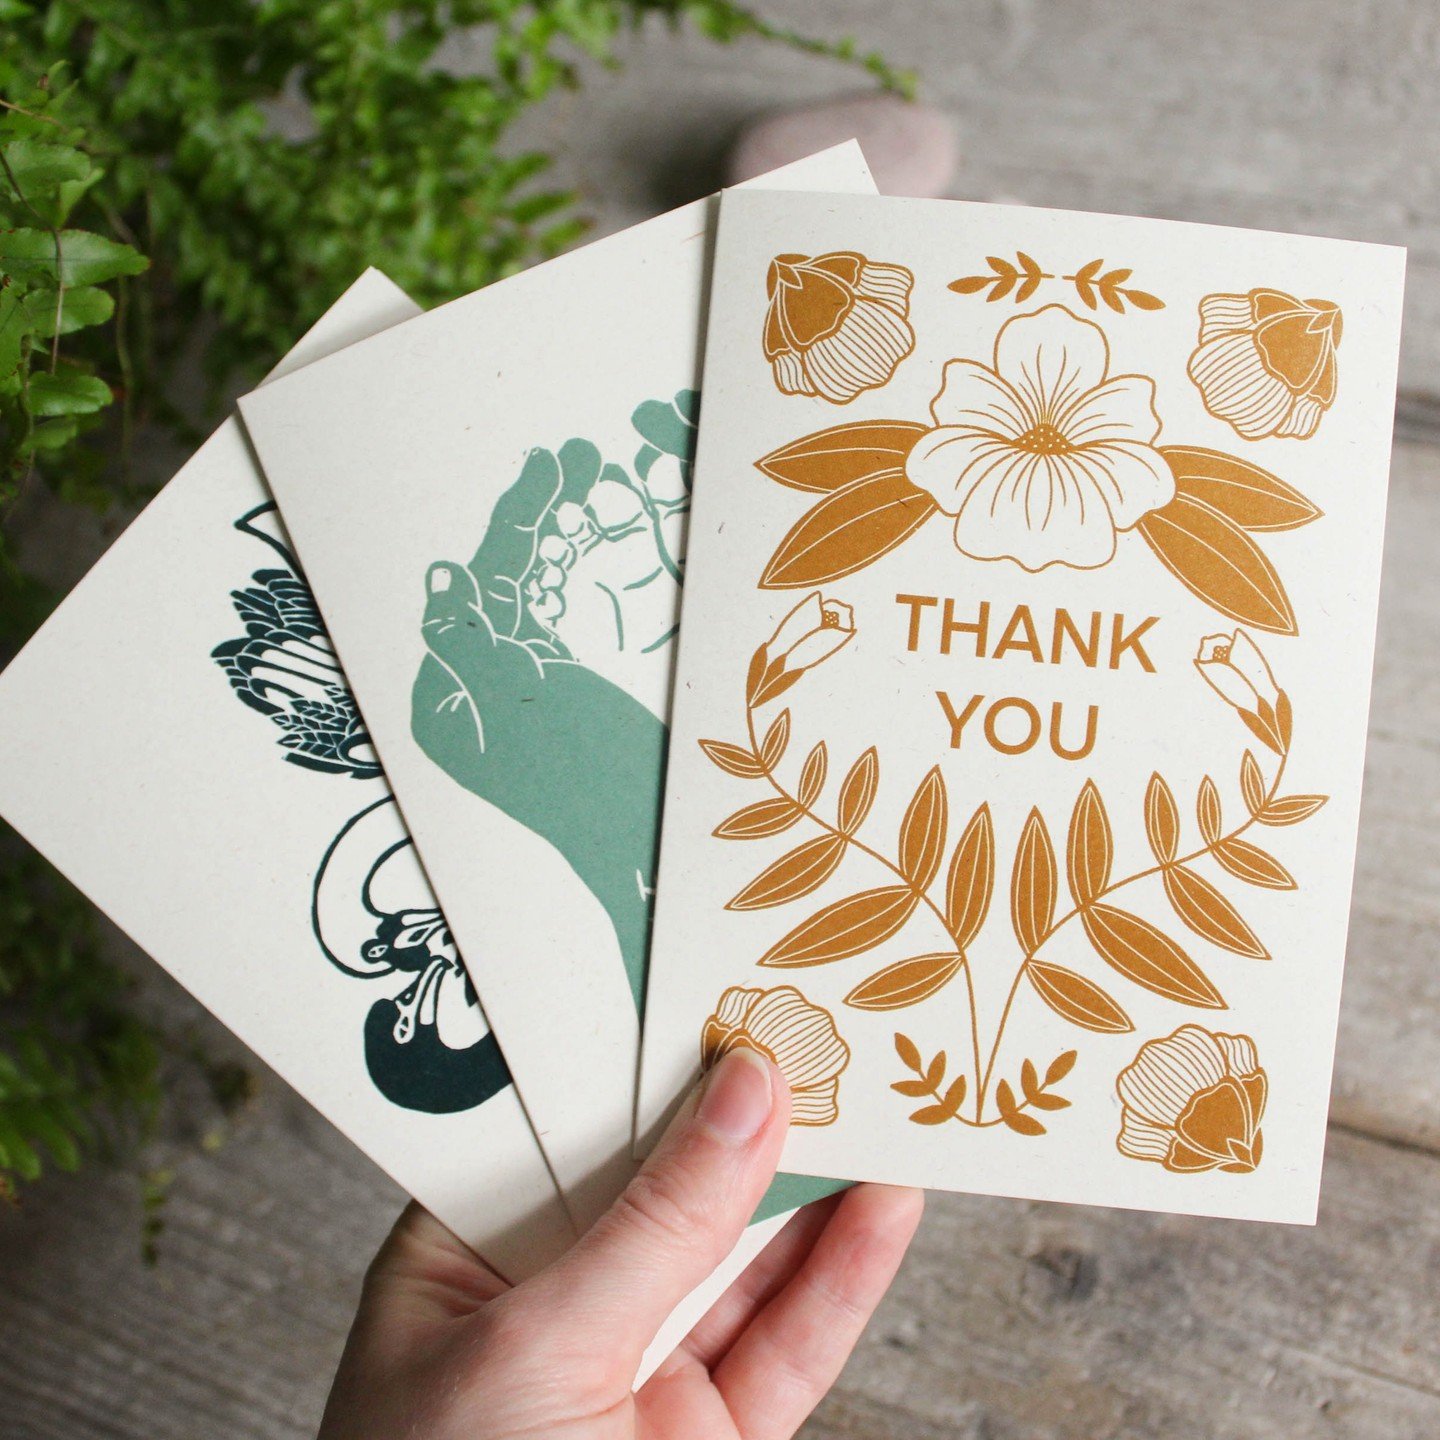 I decided to take the design from my happy birthday card and make a wee thank you card out of it too. 
.
.
.
.
.
#irishhandmade #irishmade #greetingcards #cardmaking #zerowastecards #thankyoucards #thankyoucarddesign #flowercard